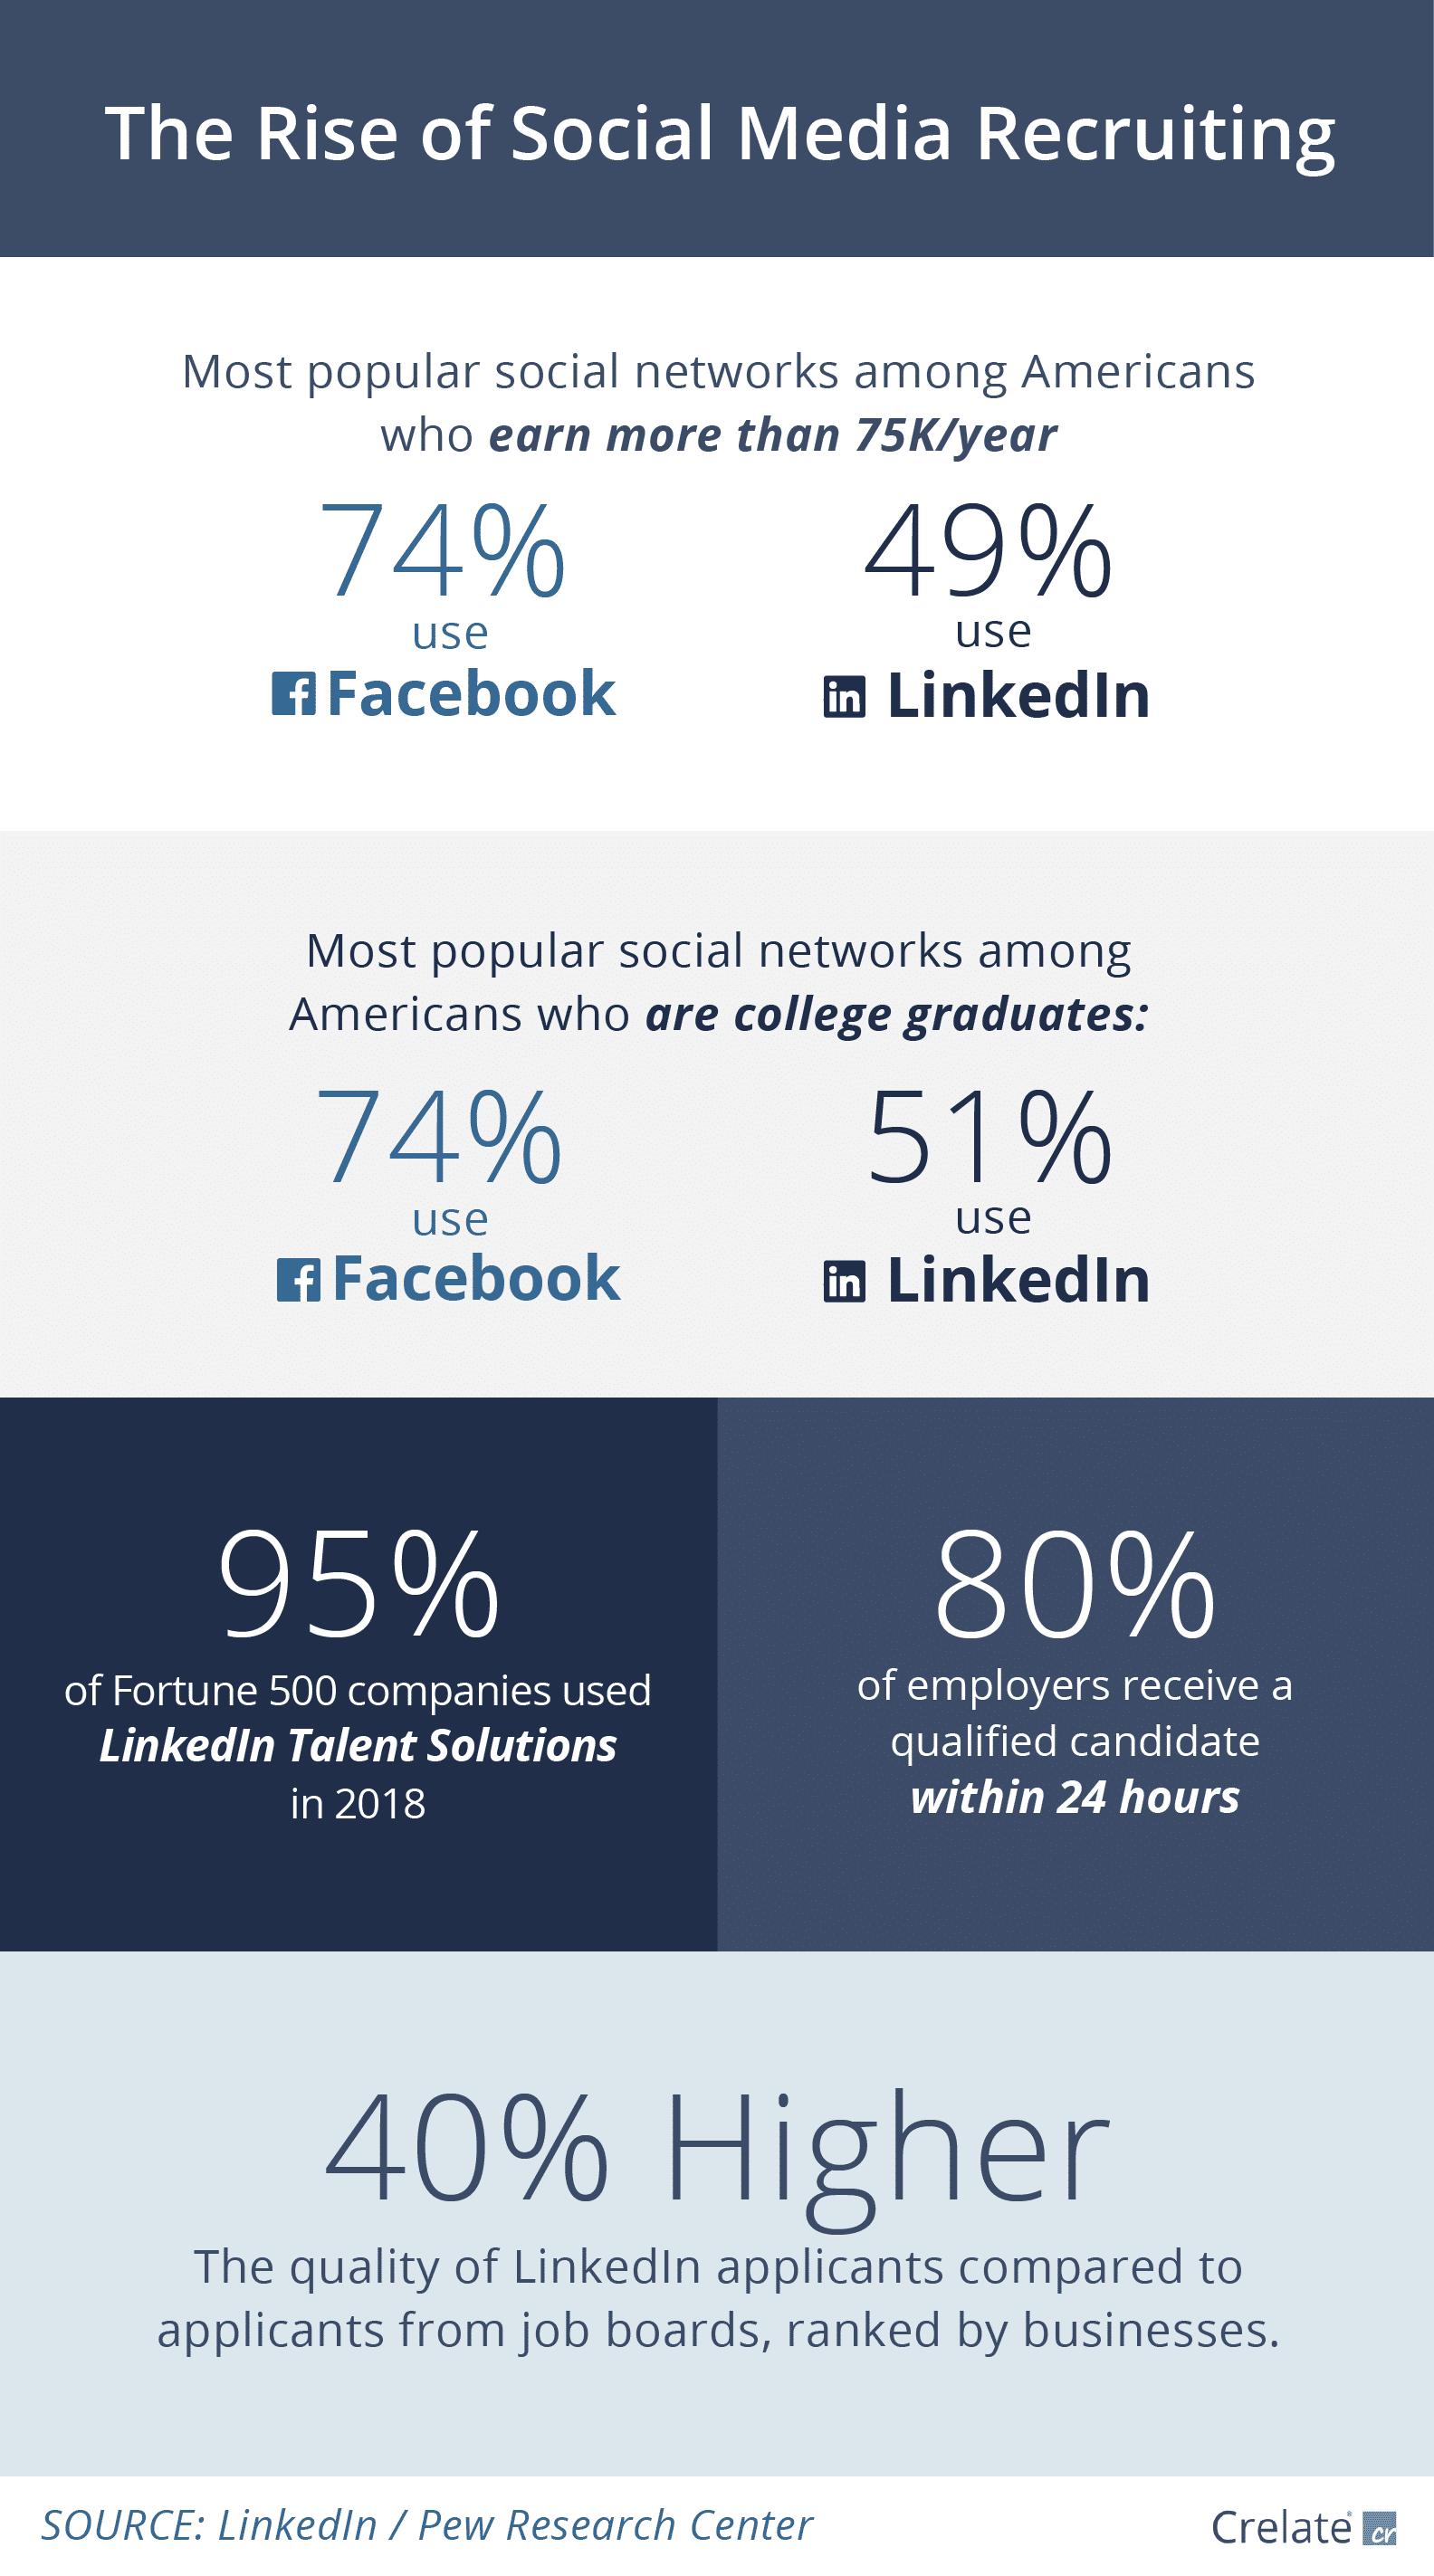 The Rise of Social Media Recruiting